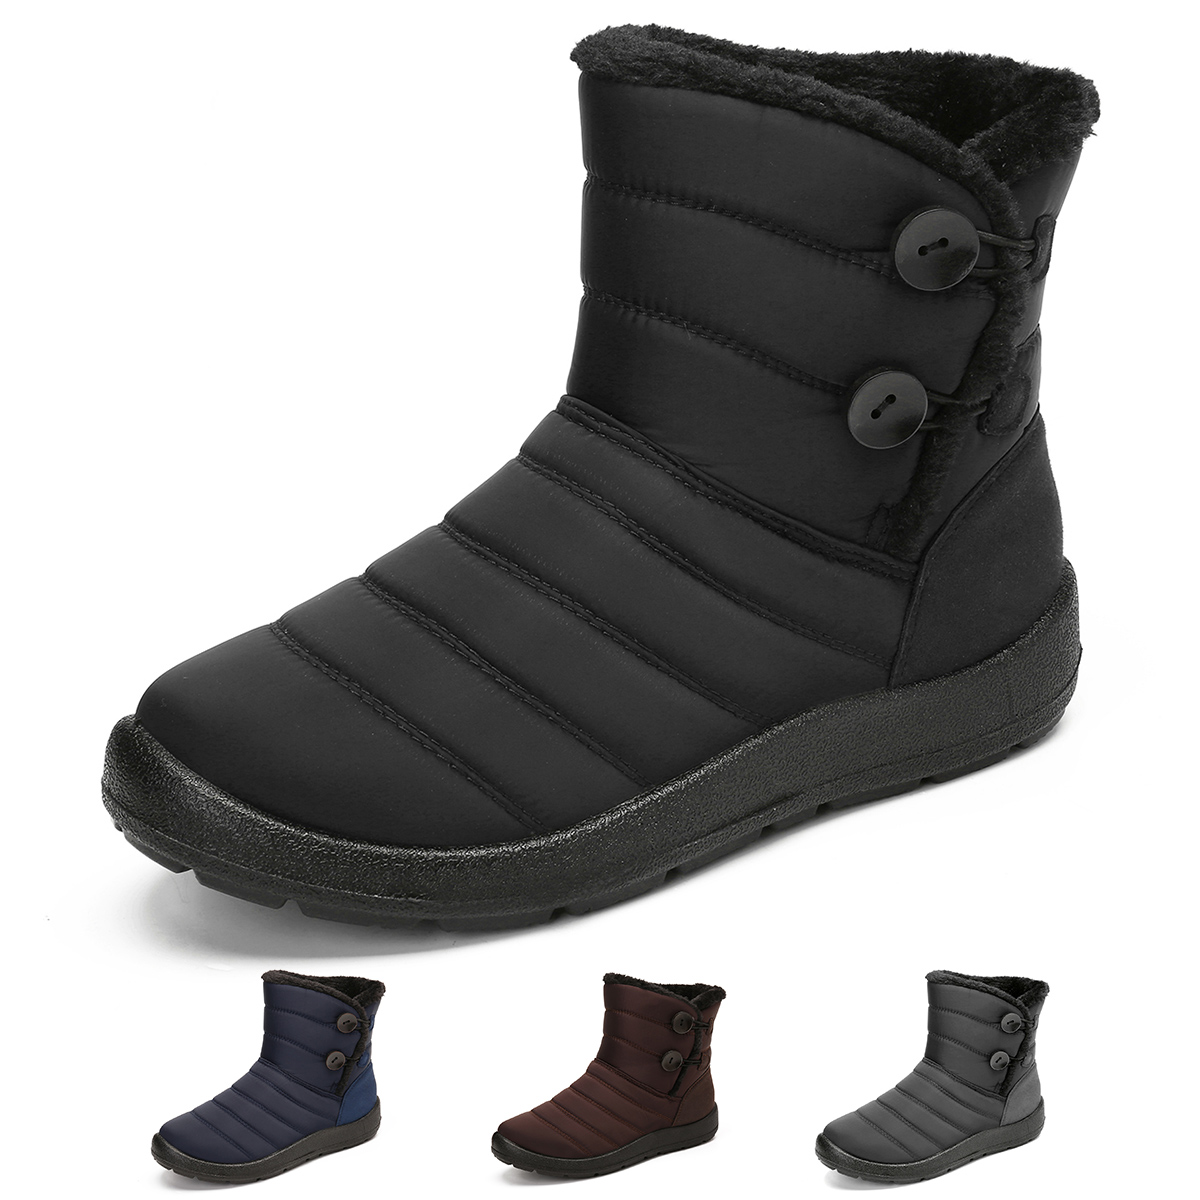 Details about   gracosy Warm Snow Boots Outdoor for Women Winter Fur Lining Shoes Anti-Slip Ligh